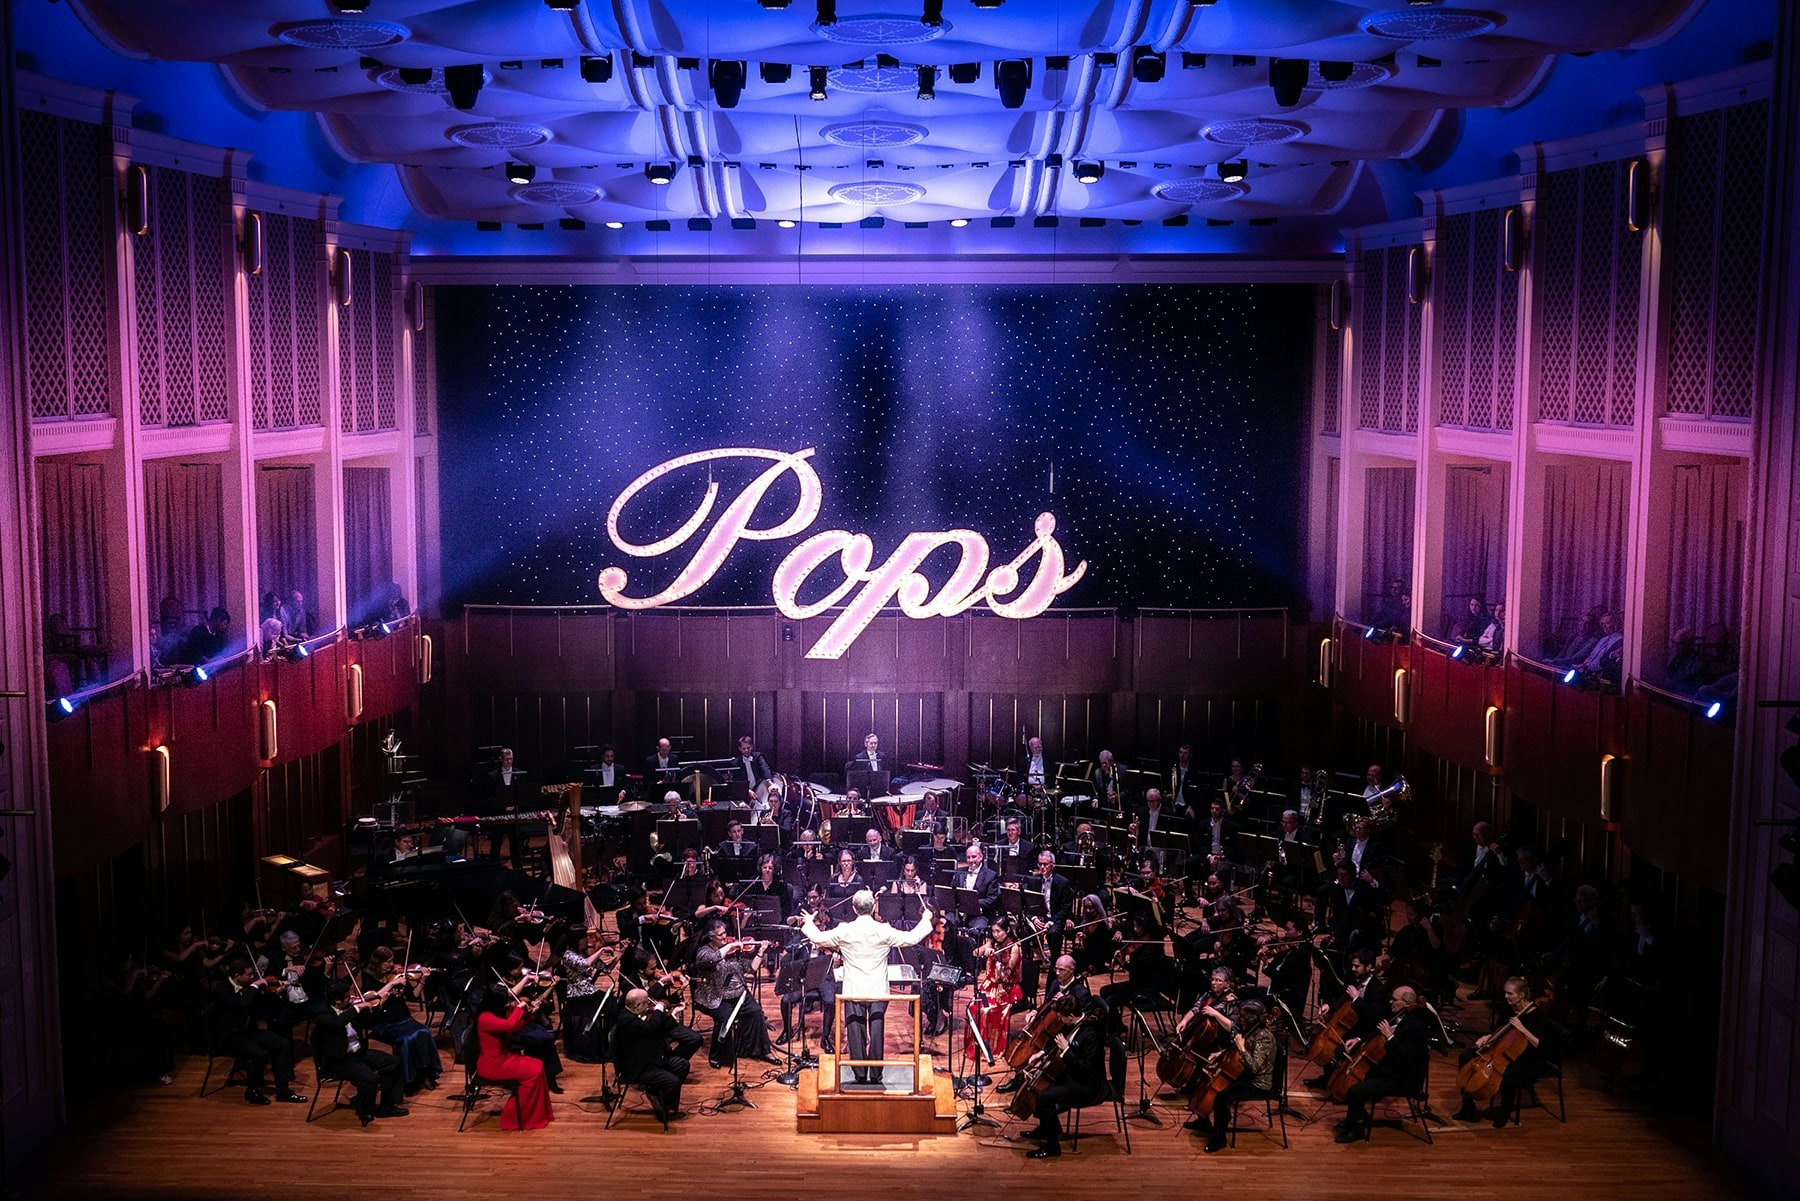 About Indianapolis Symphony Orchestra